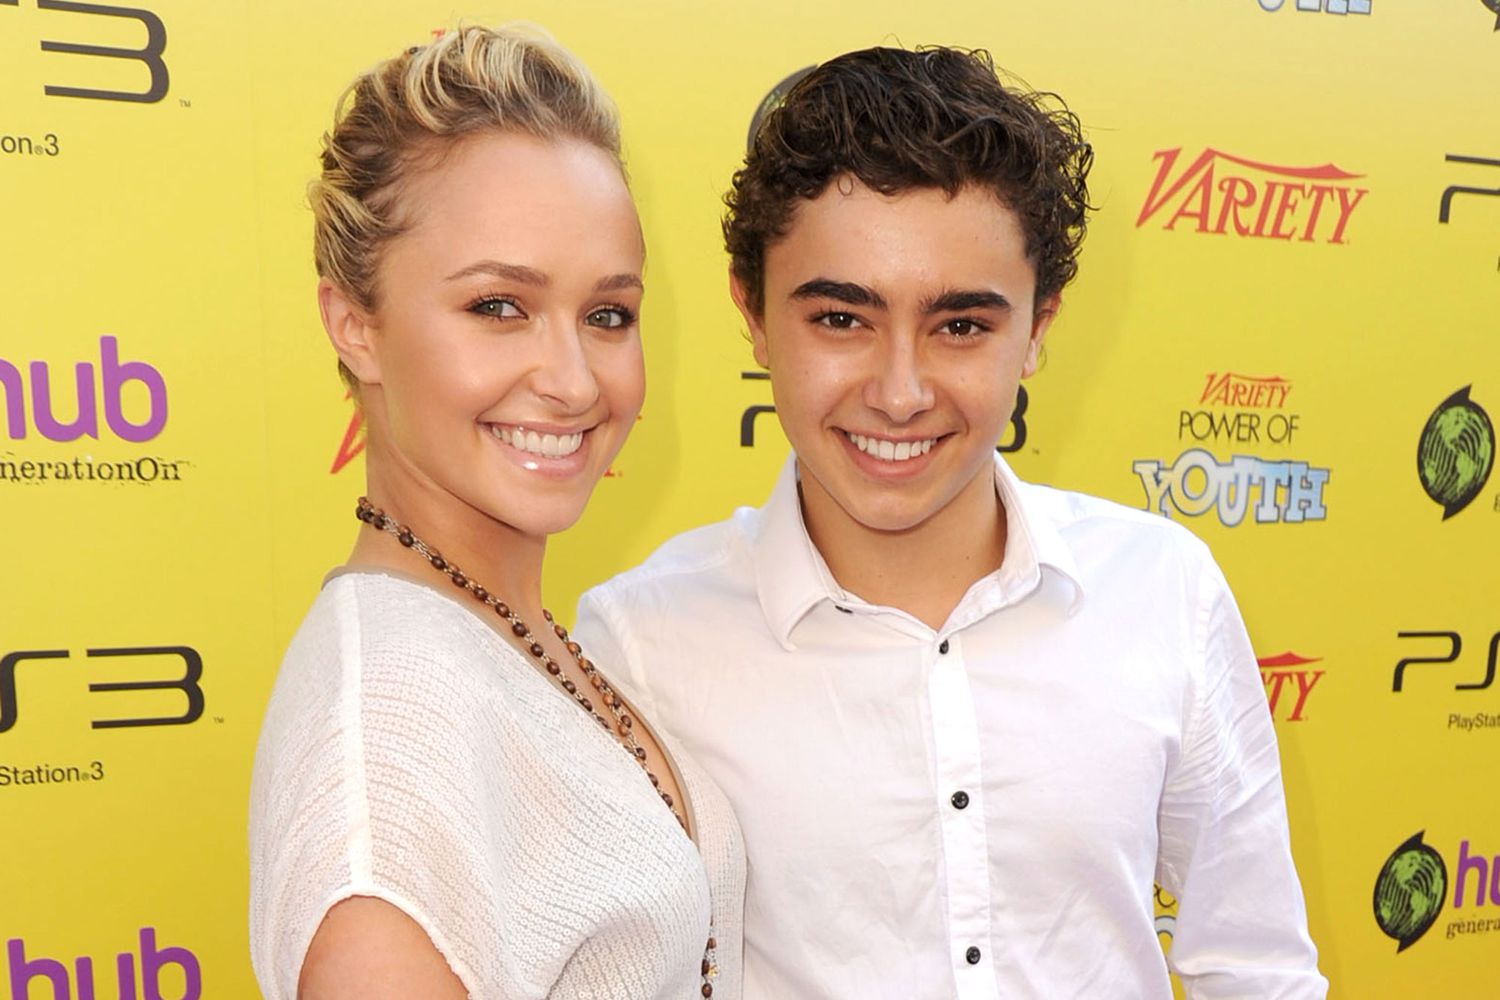 Actress Hayden Panettiere (L) and Jansen Panettiere arrive at Variety's 5th annual Power Of Youth event presented by The Hub at Paramount Studios on October 22, 2011 in Hollywood, California.